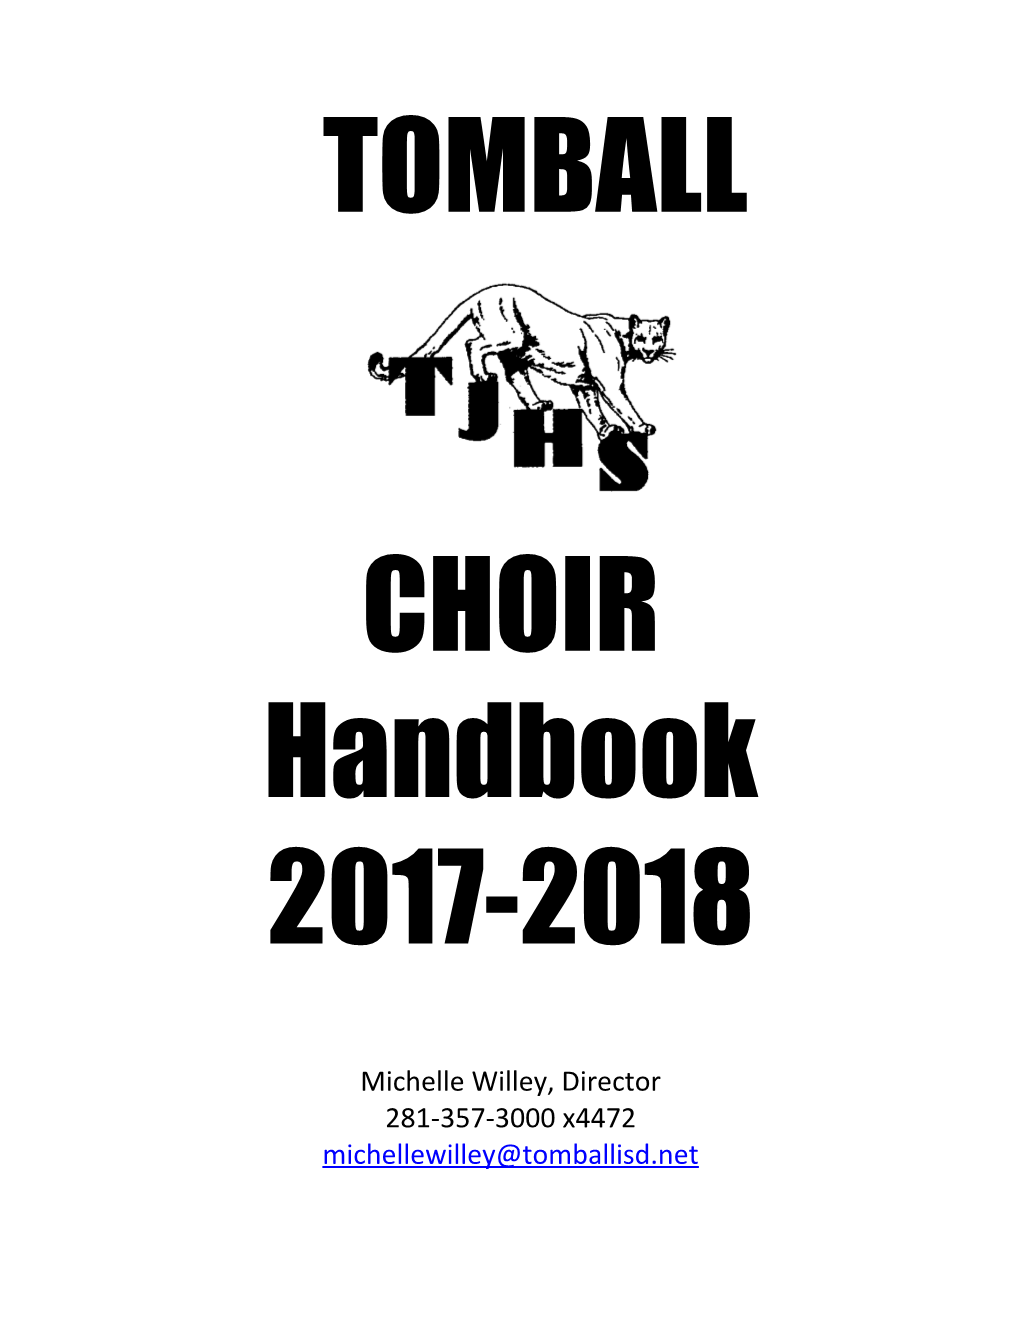 Here Are Some Ways That You Can Be a Part of the Tomball Choir